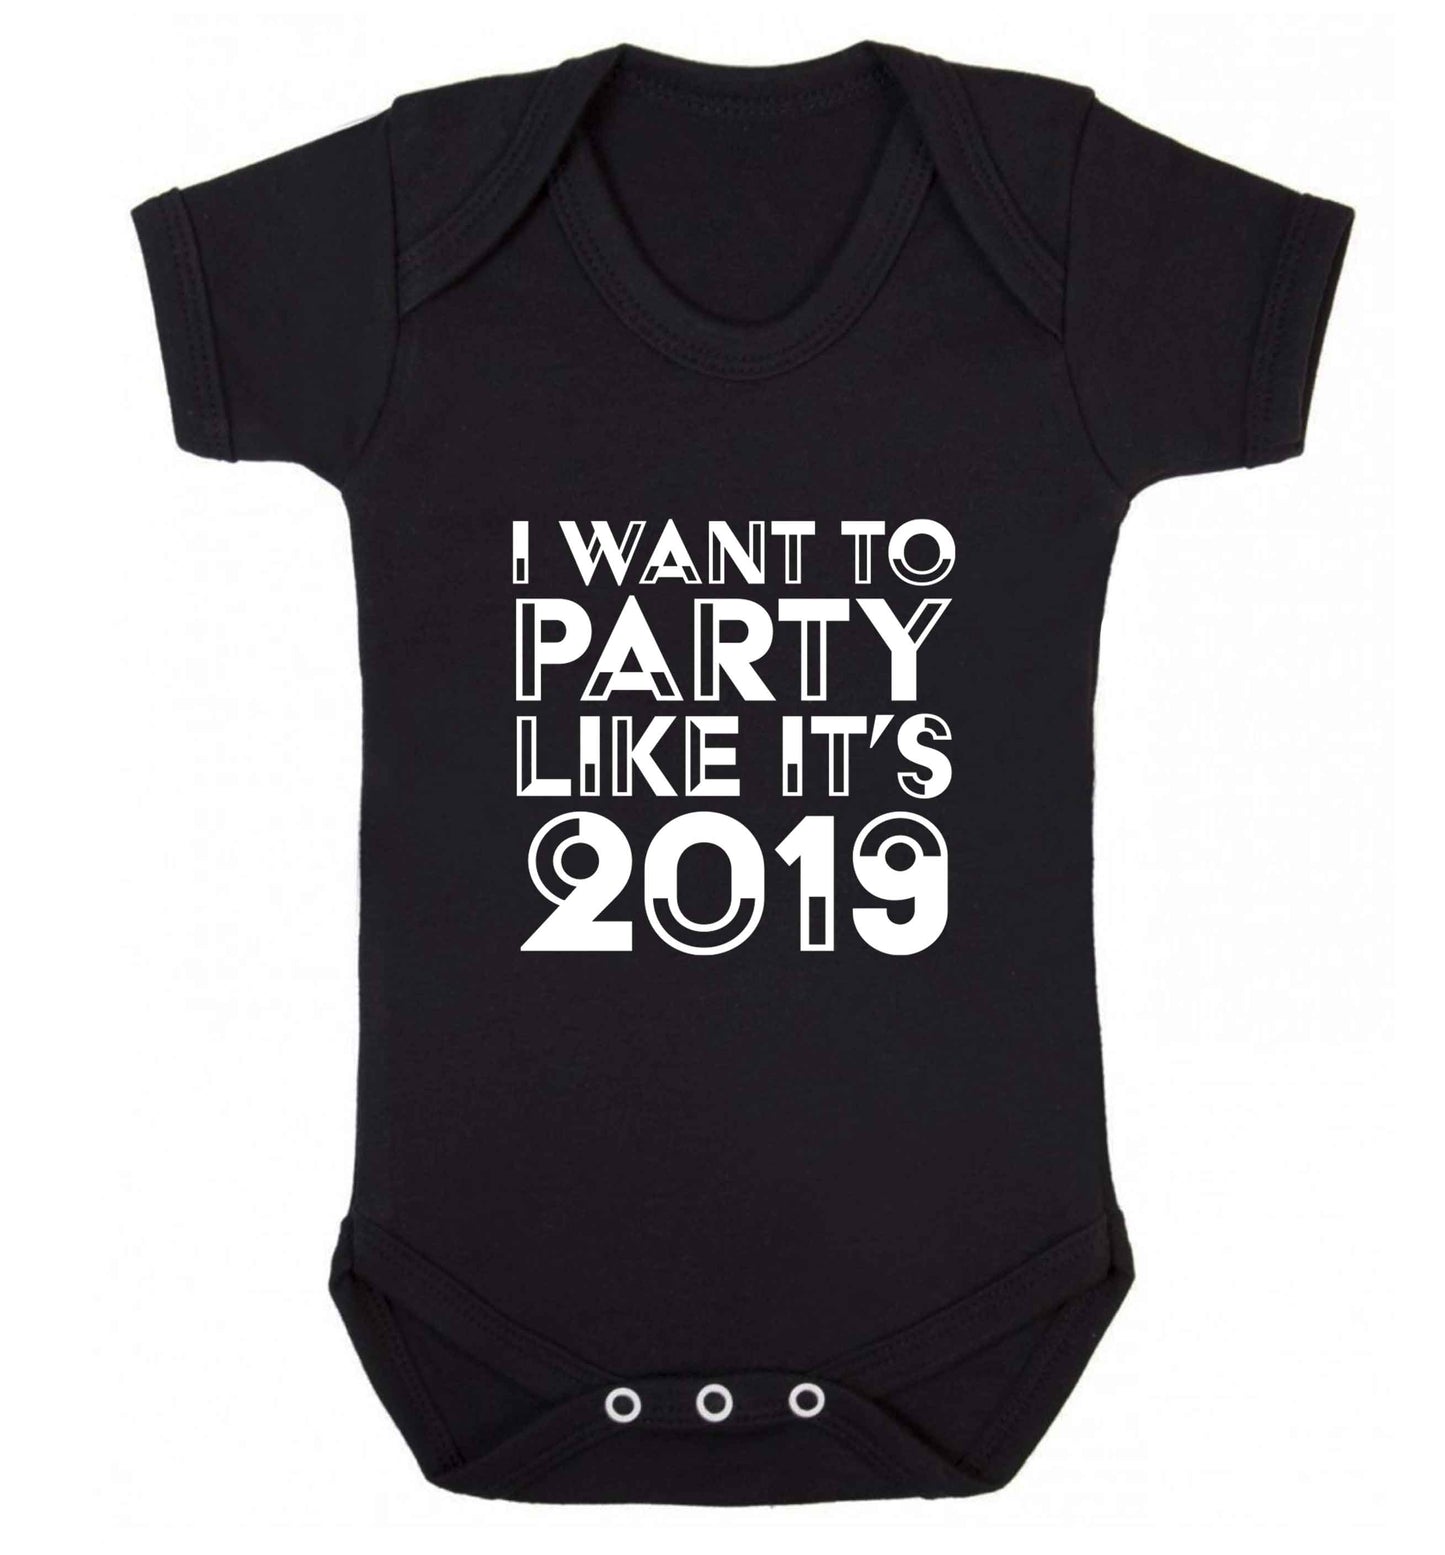 I want to party like it's 2019 baby vest black 18-24 months